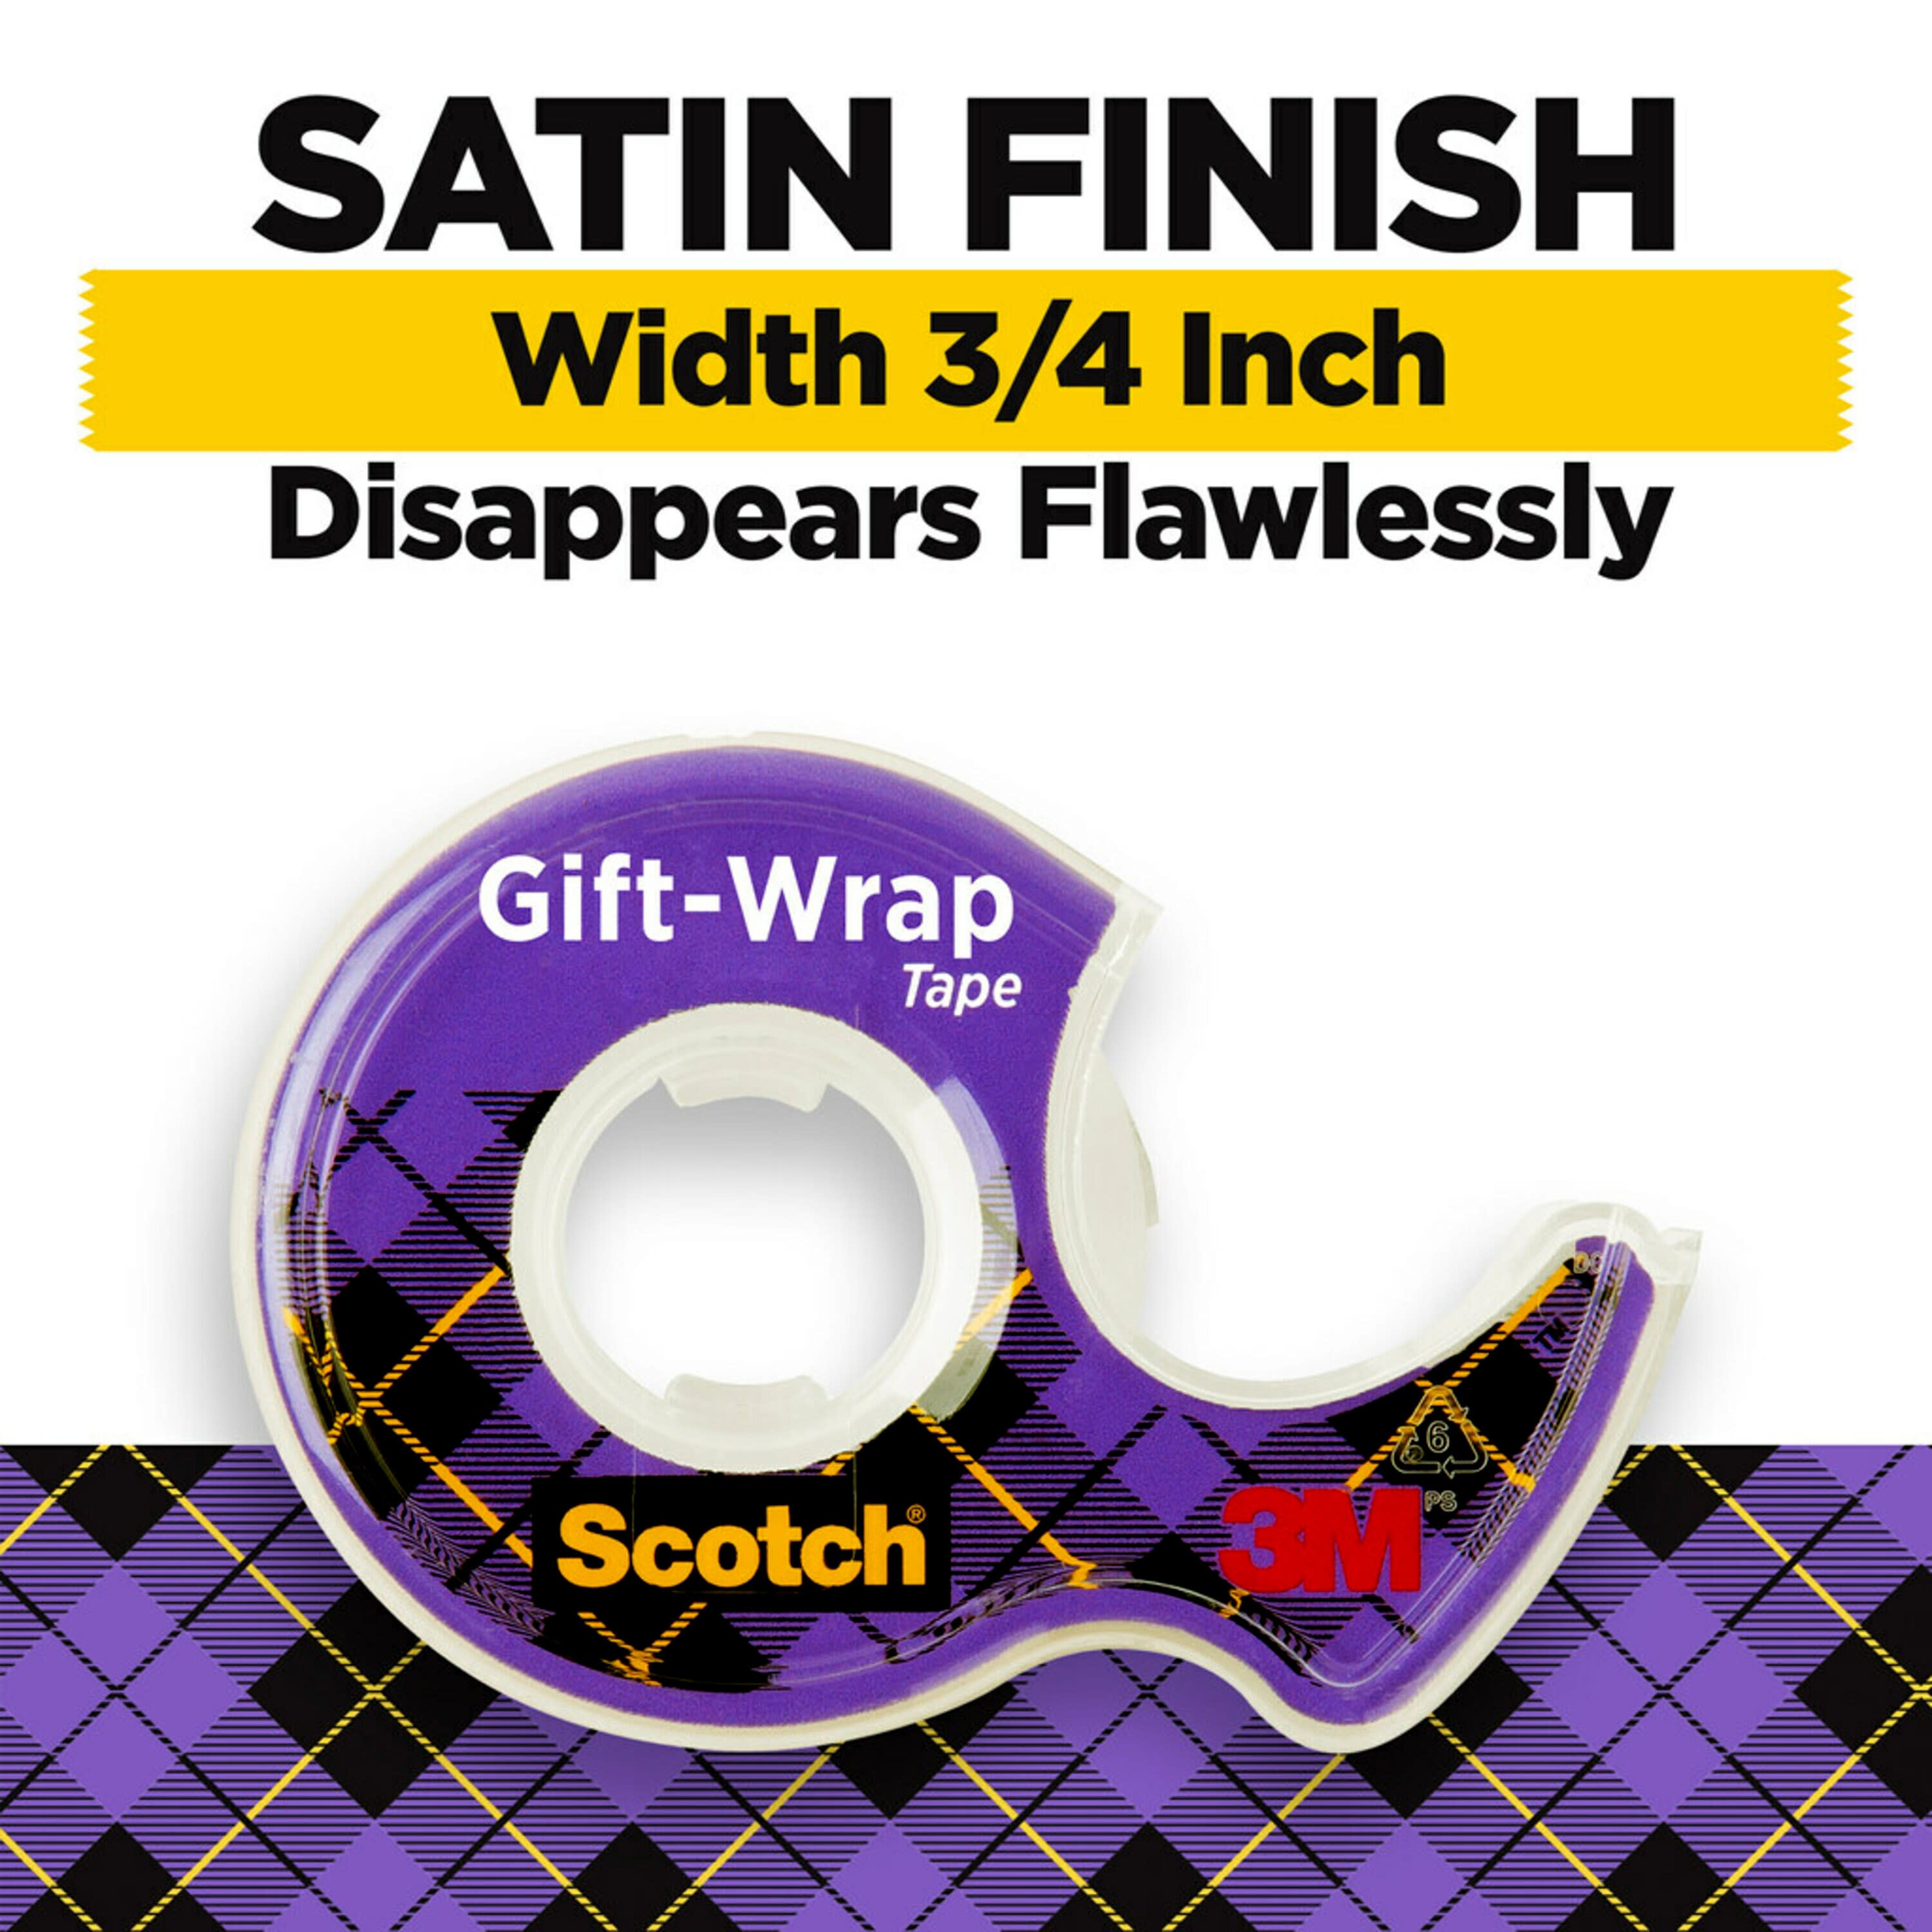 Scotch® Gift-Wrap Tape, 3/4 in. x 650 in., 1 Dispenser/Pack - image 2 of 15